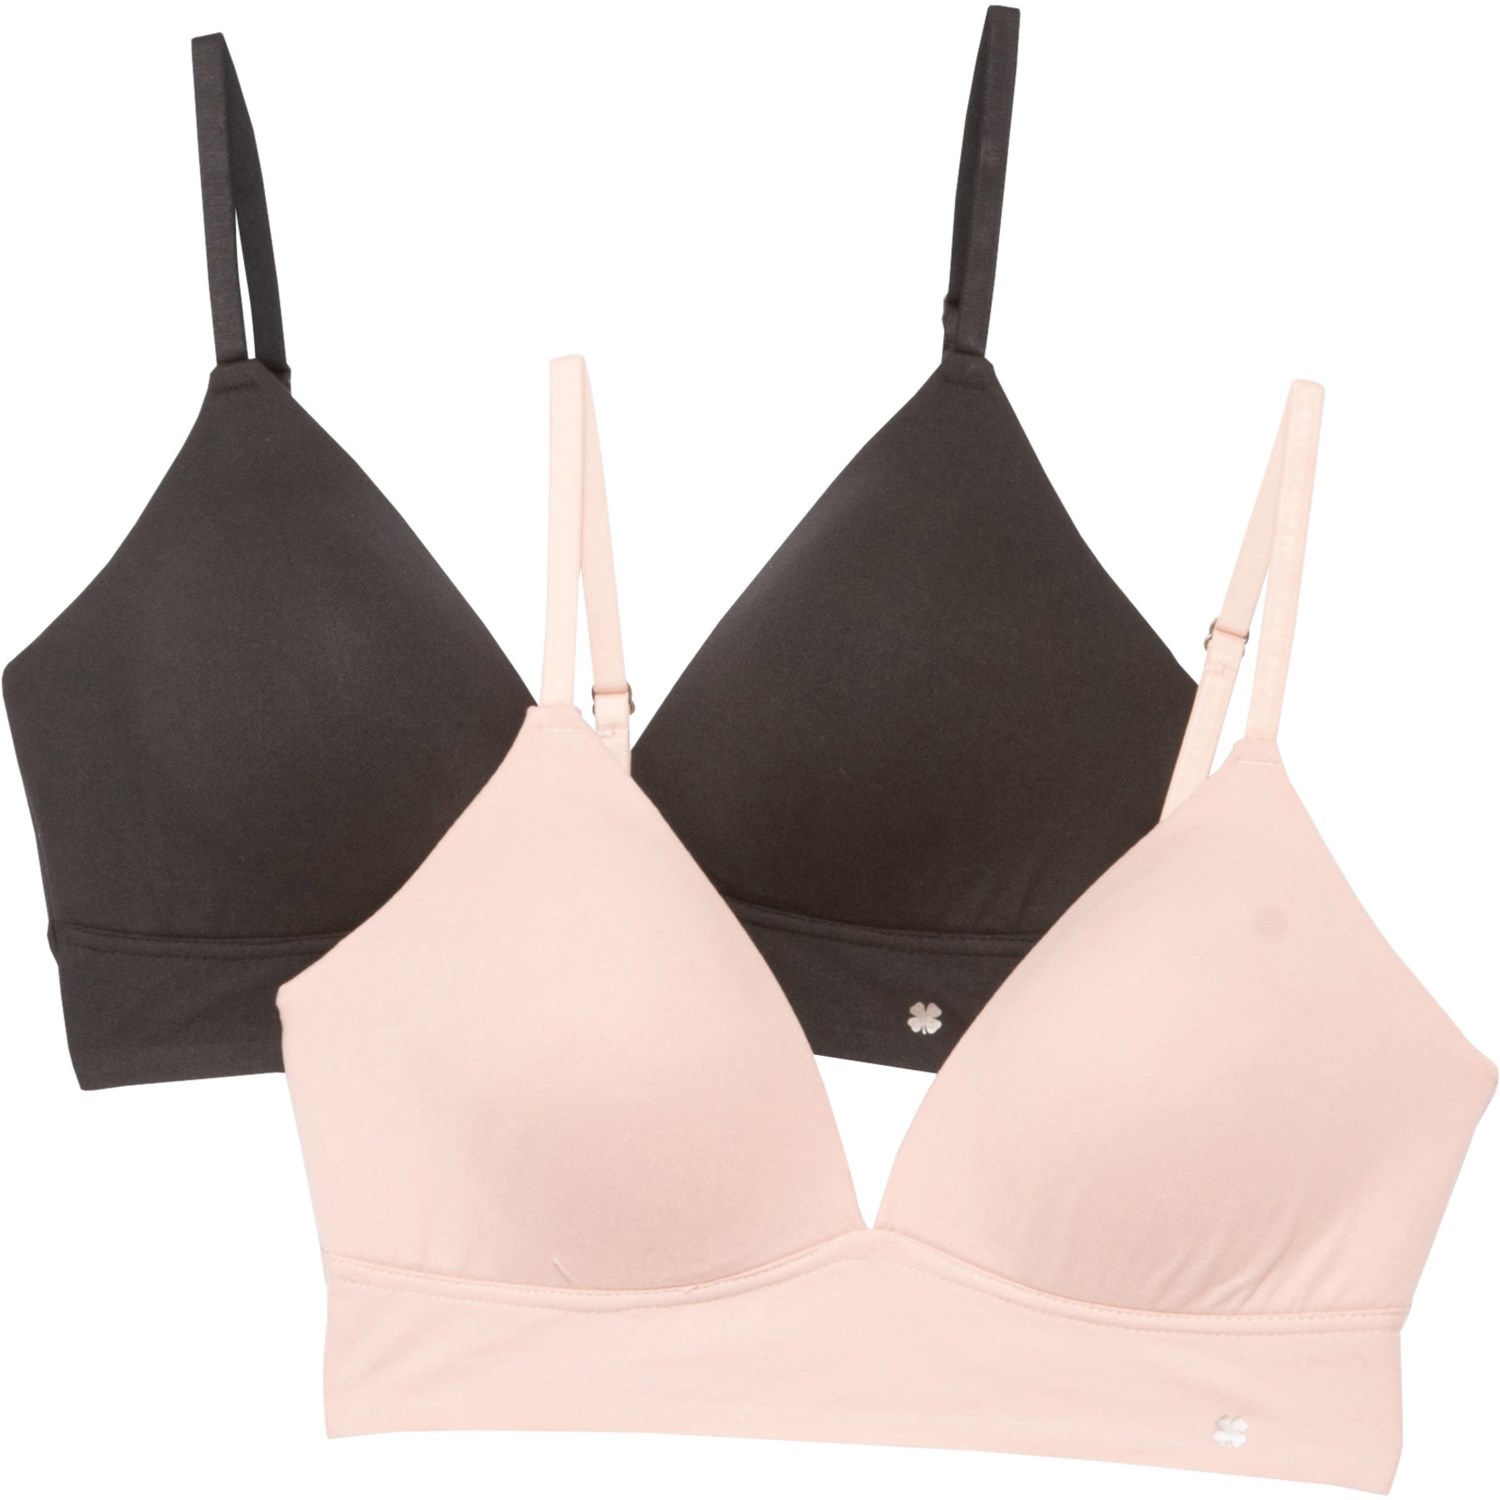 Freebra Invisible Bra Size C 2 Pack Nude And Black (2 Nude, 2